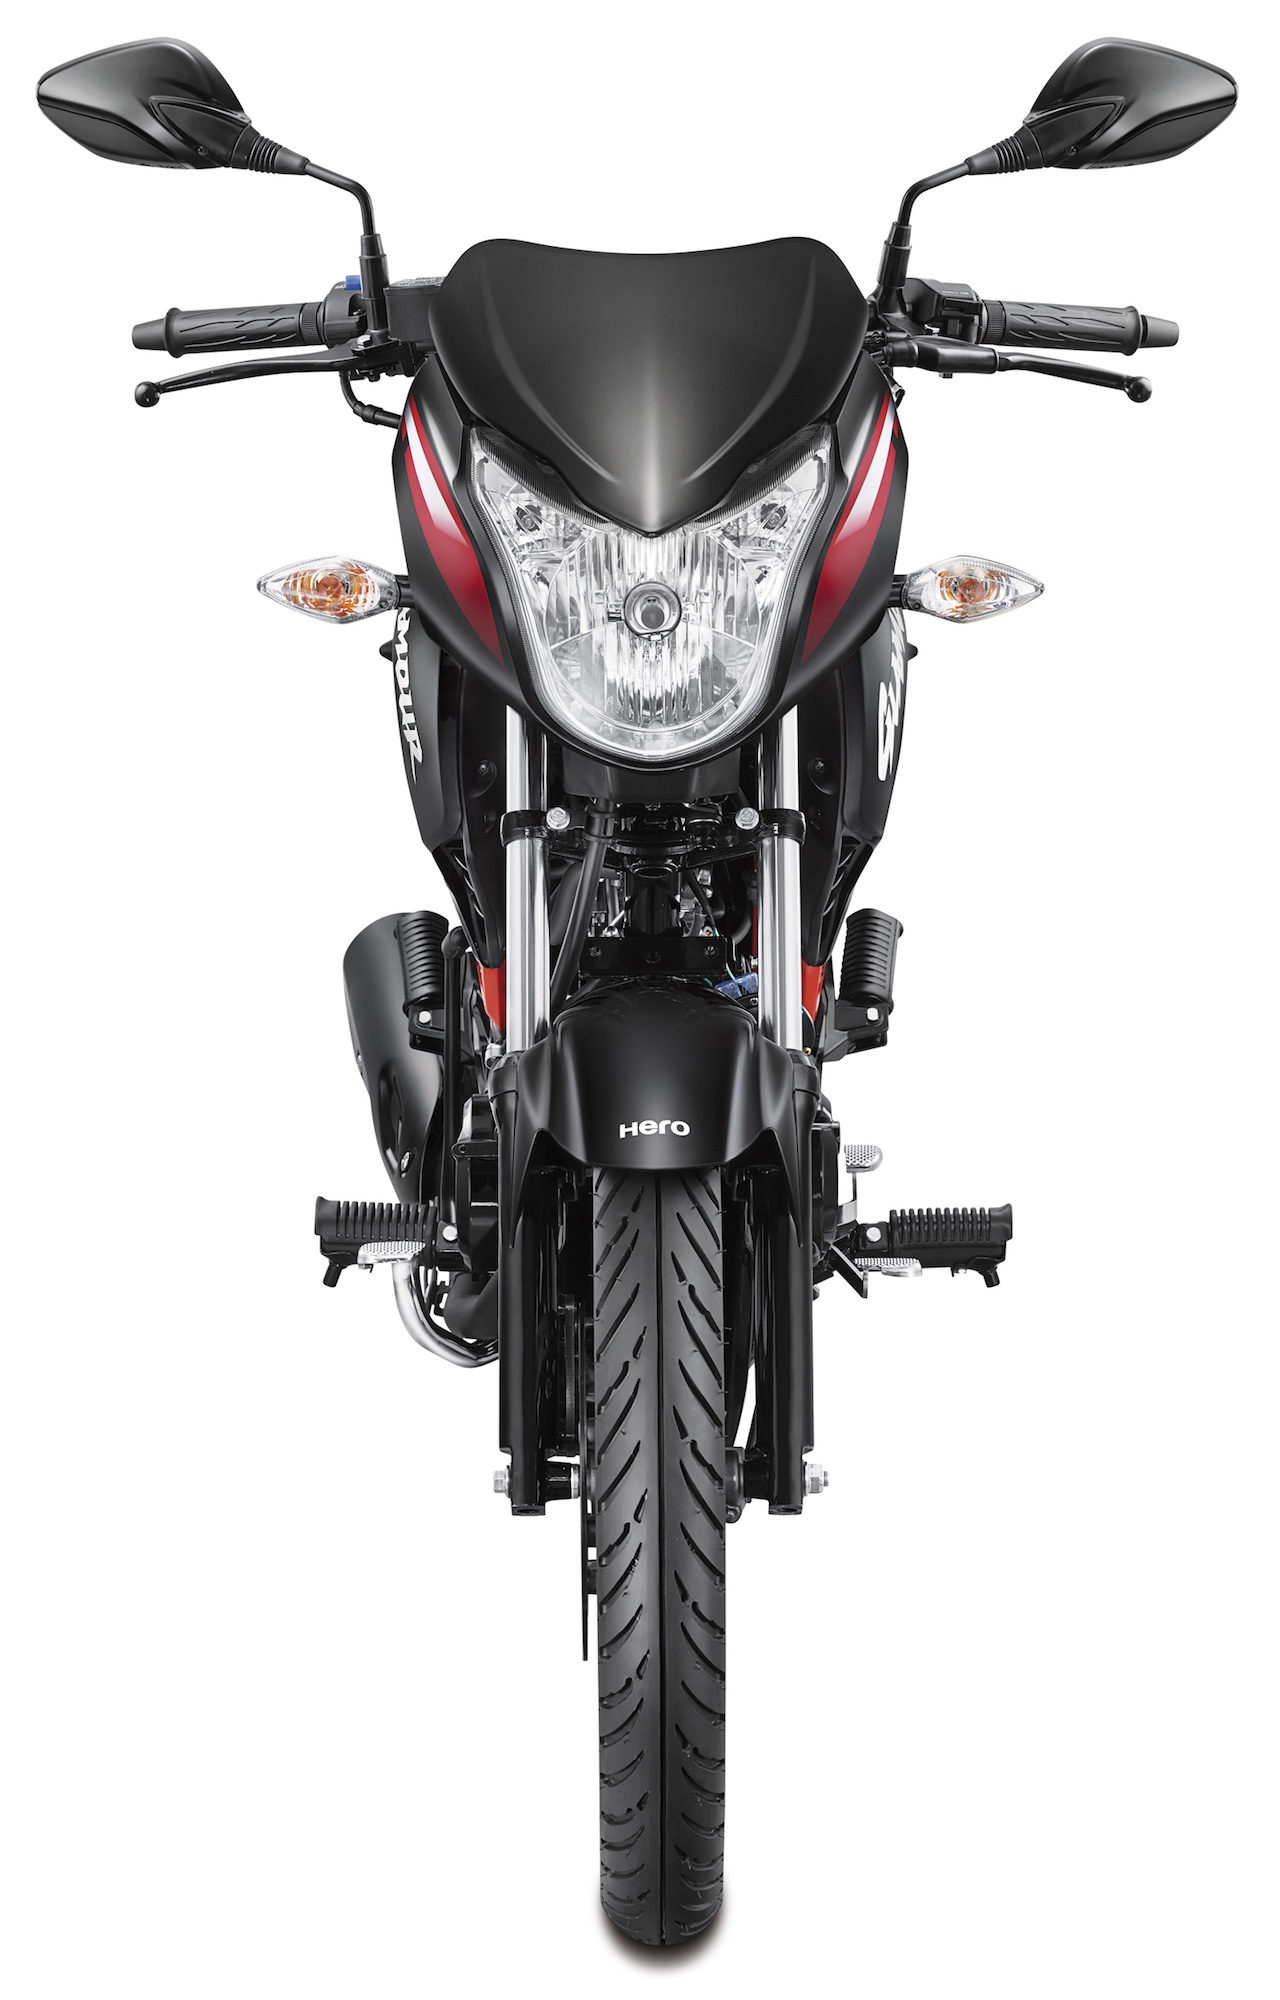 2017 Hero Glamour 125 Revealed Gets Higher Power Mileage